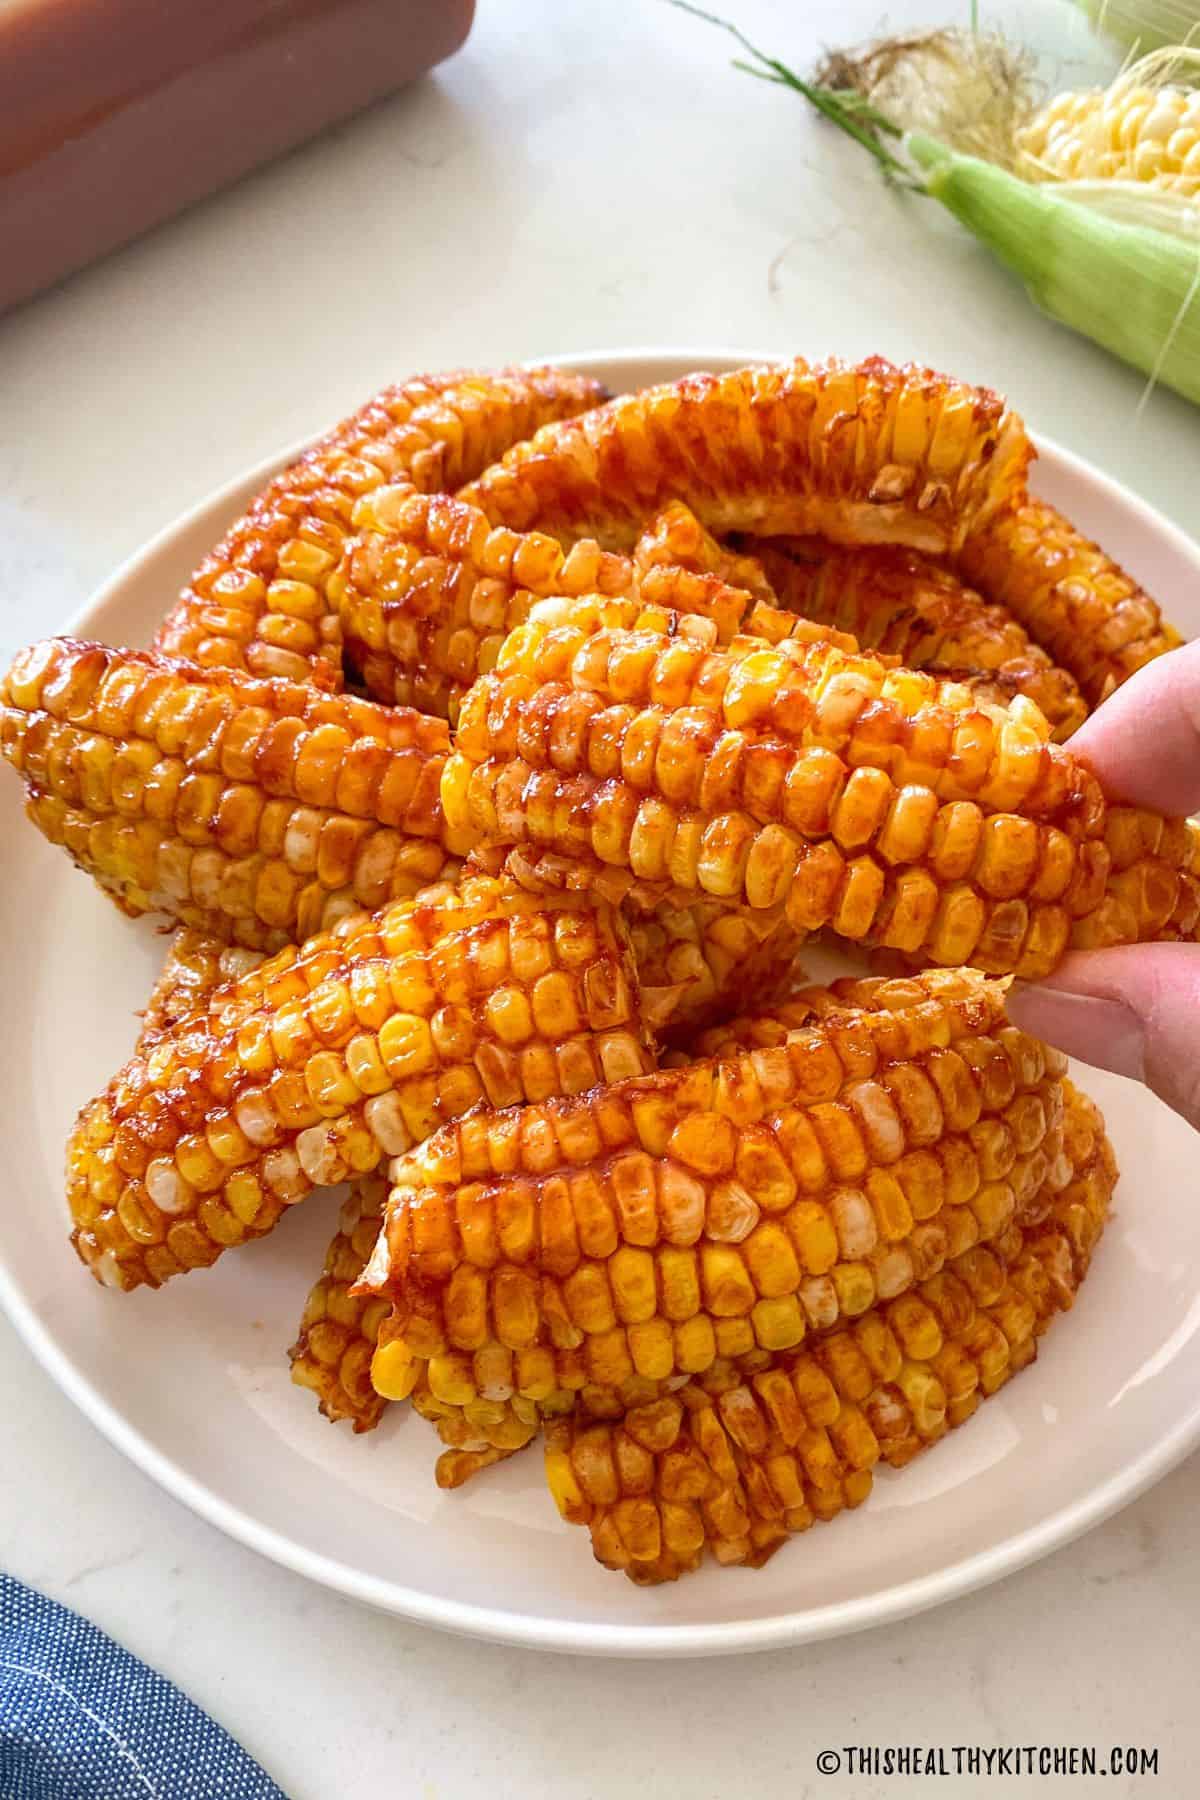 Hand picking up corn that's covered in bbq sauce.